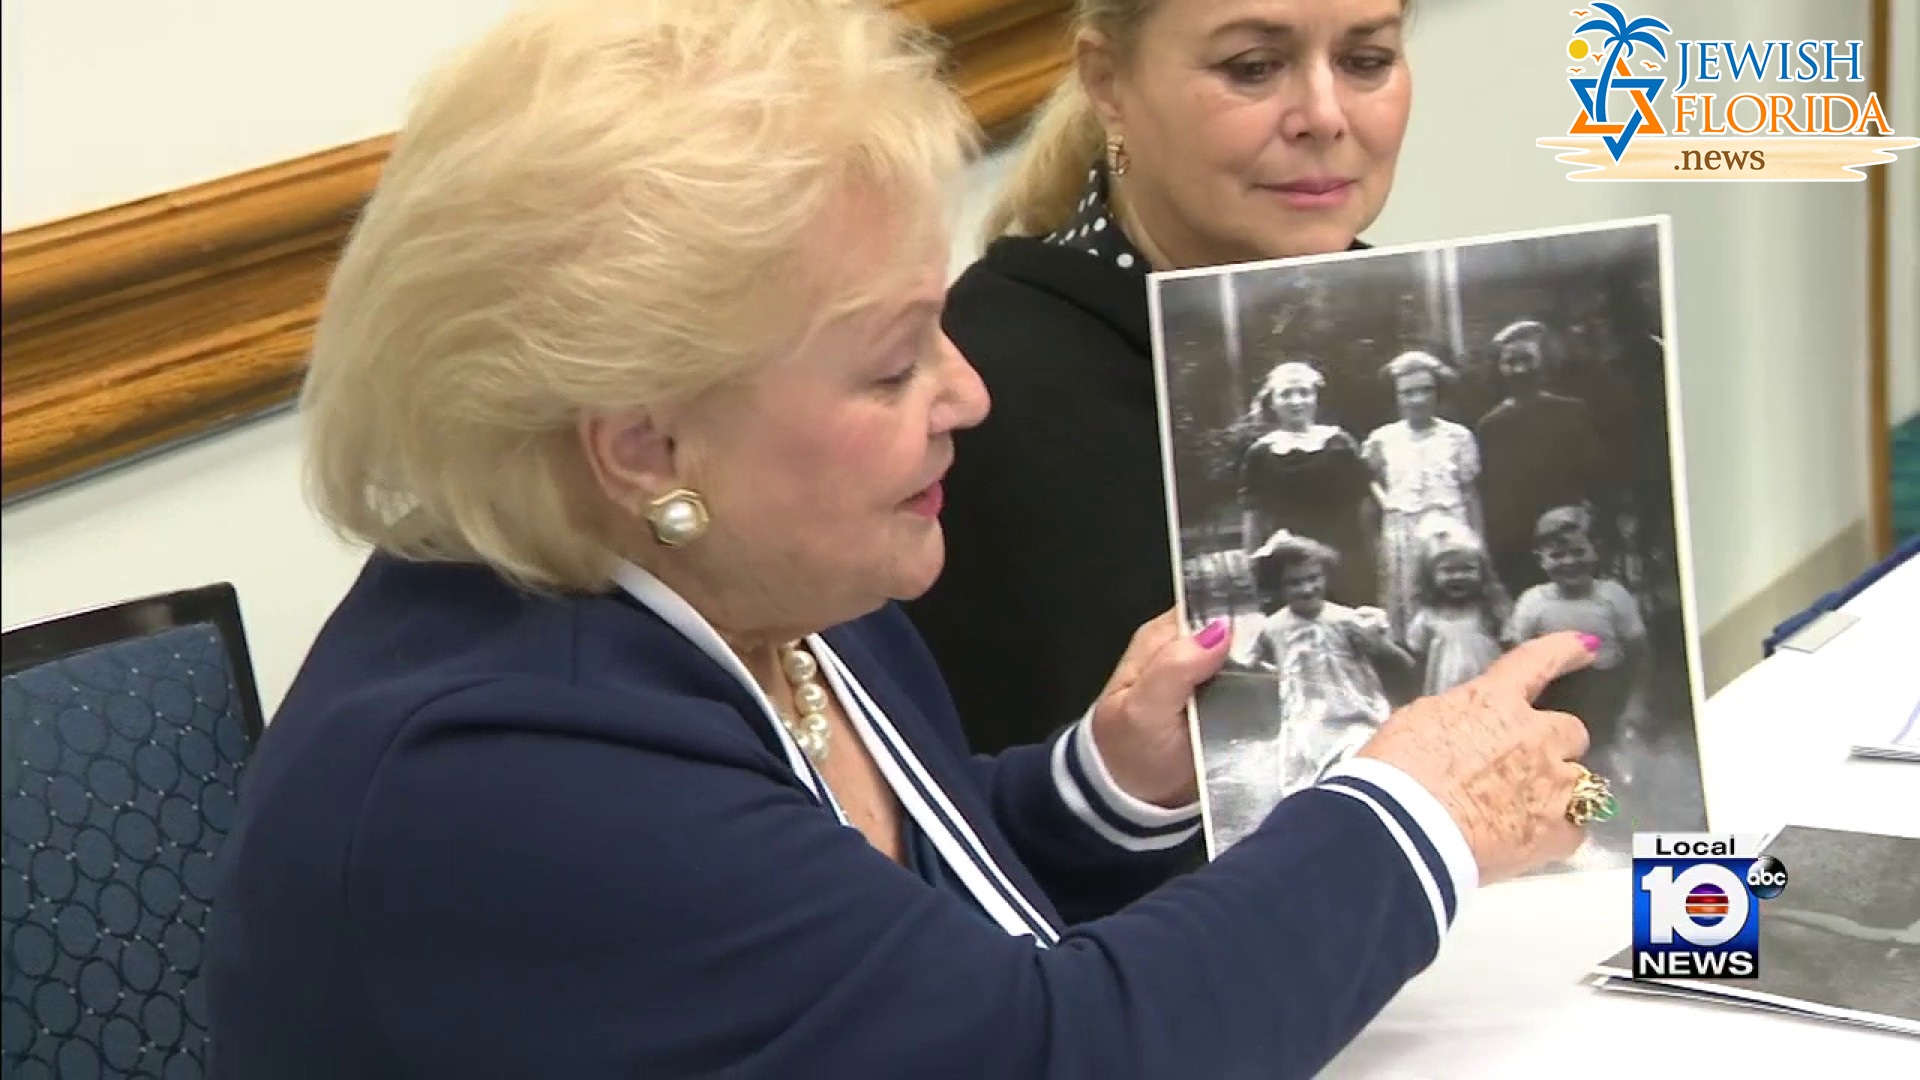 Holocaust survivors speak to students in Fort Lauderdale on annual day of remembrance